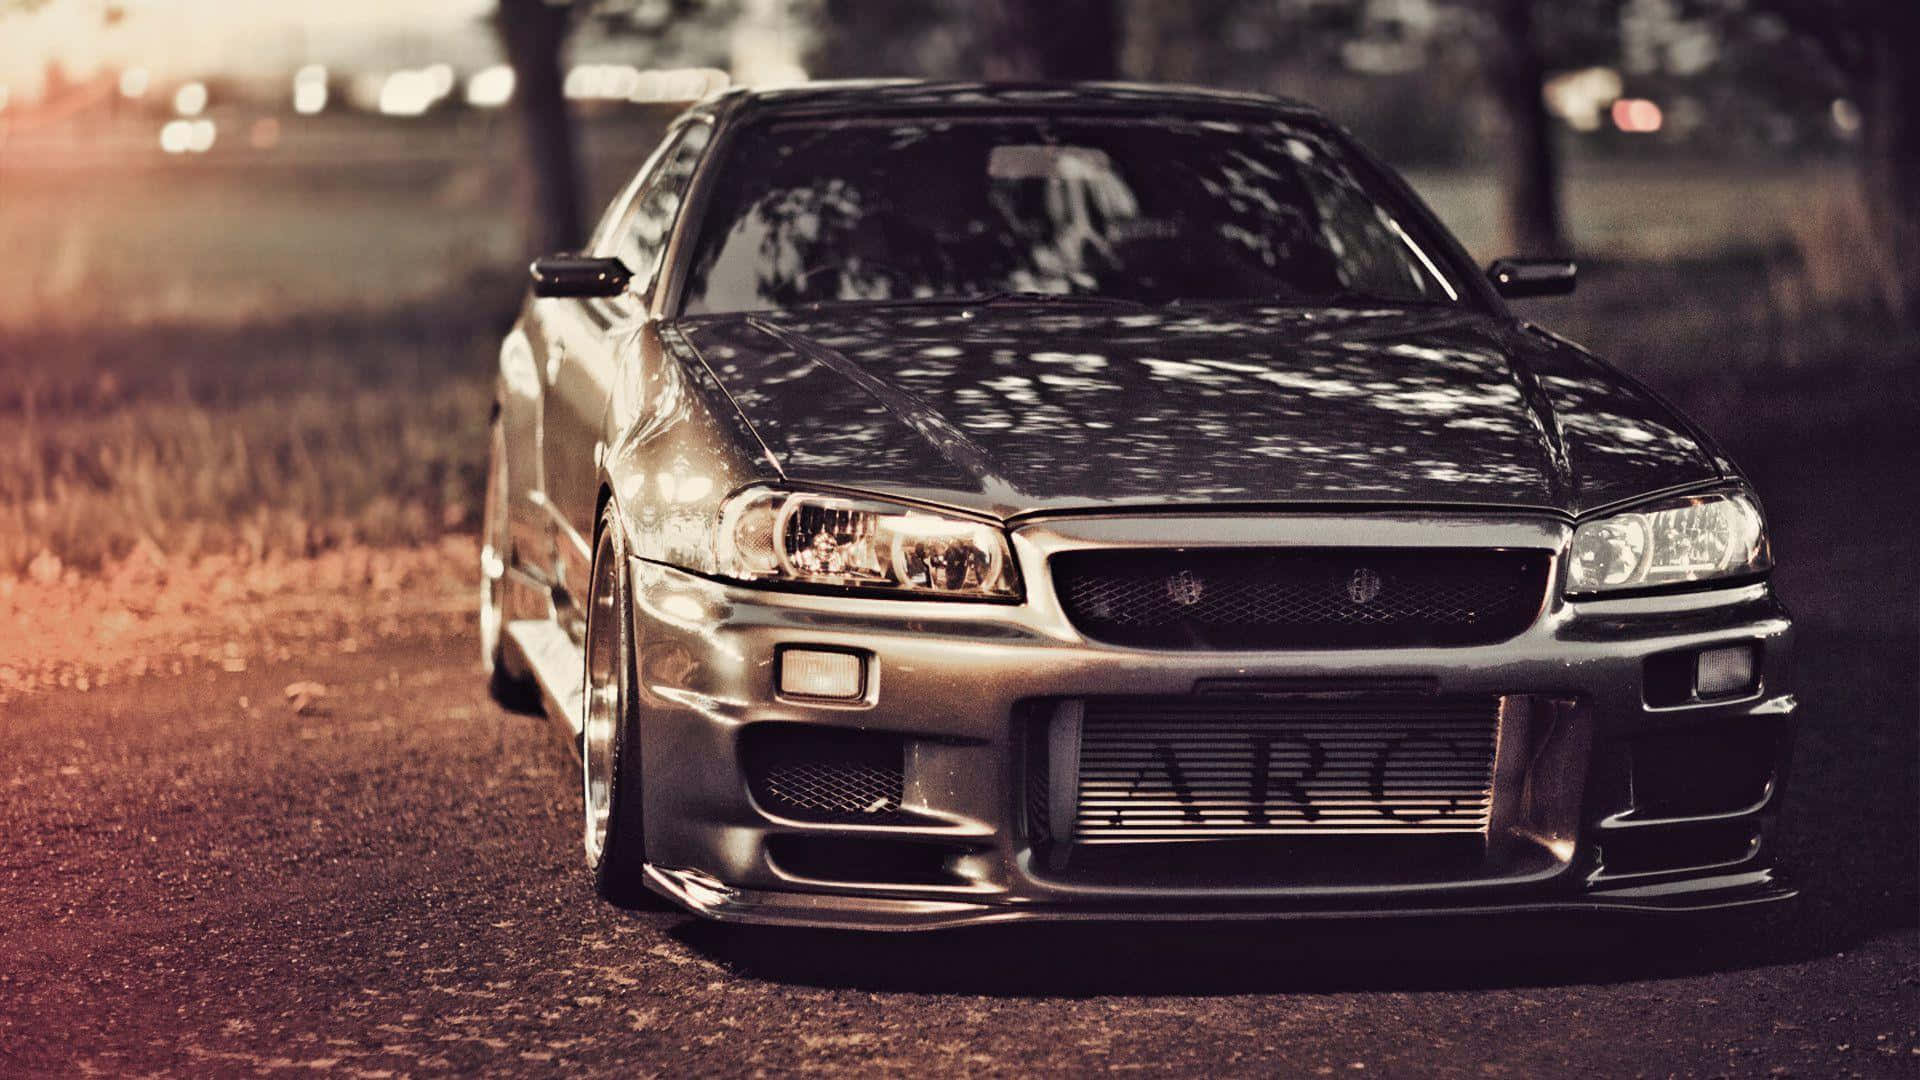 Cool Nissan Skyline ready to revolutionize the streets Wallpaper